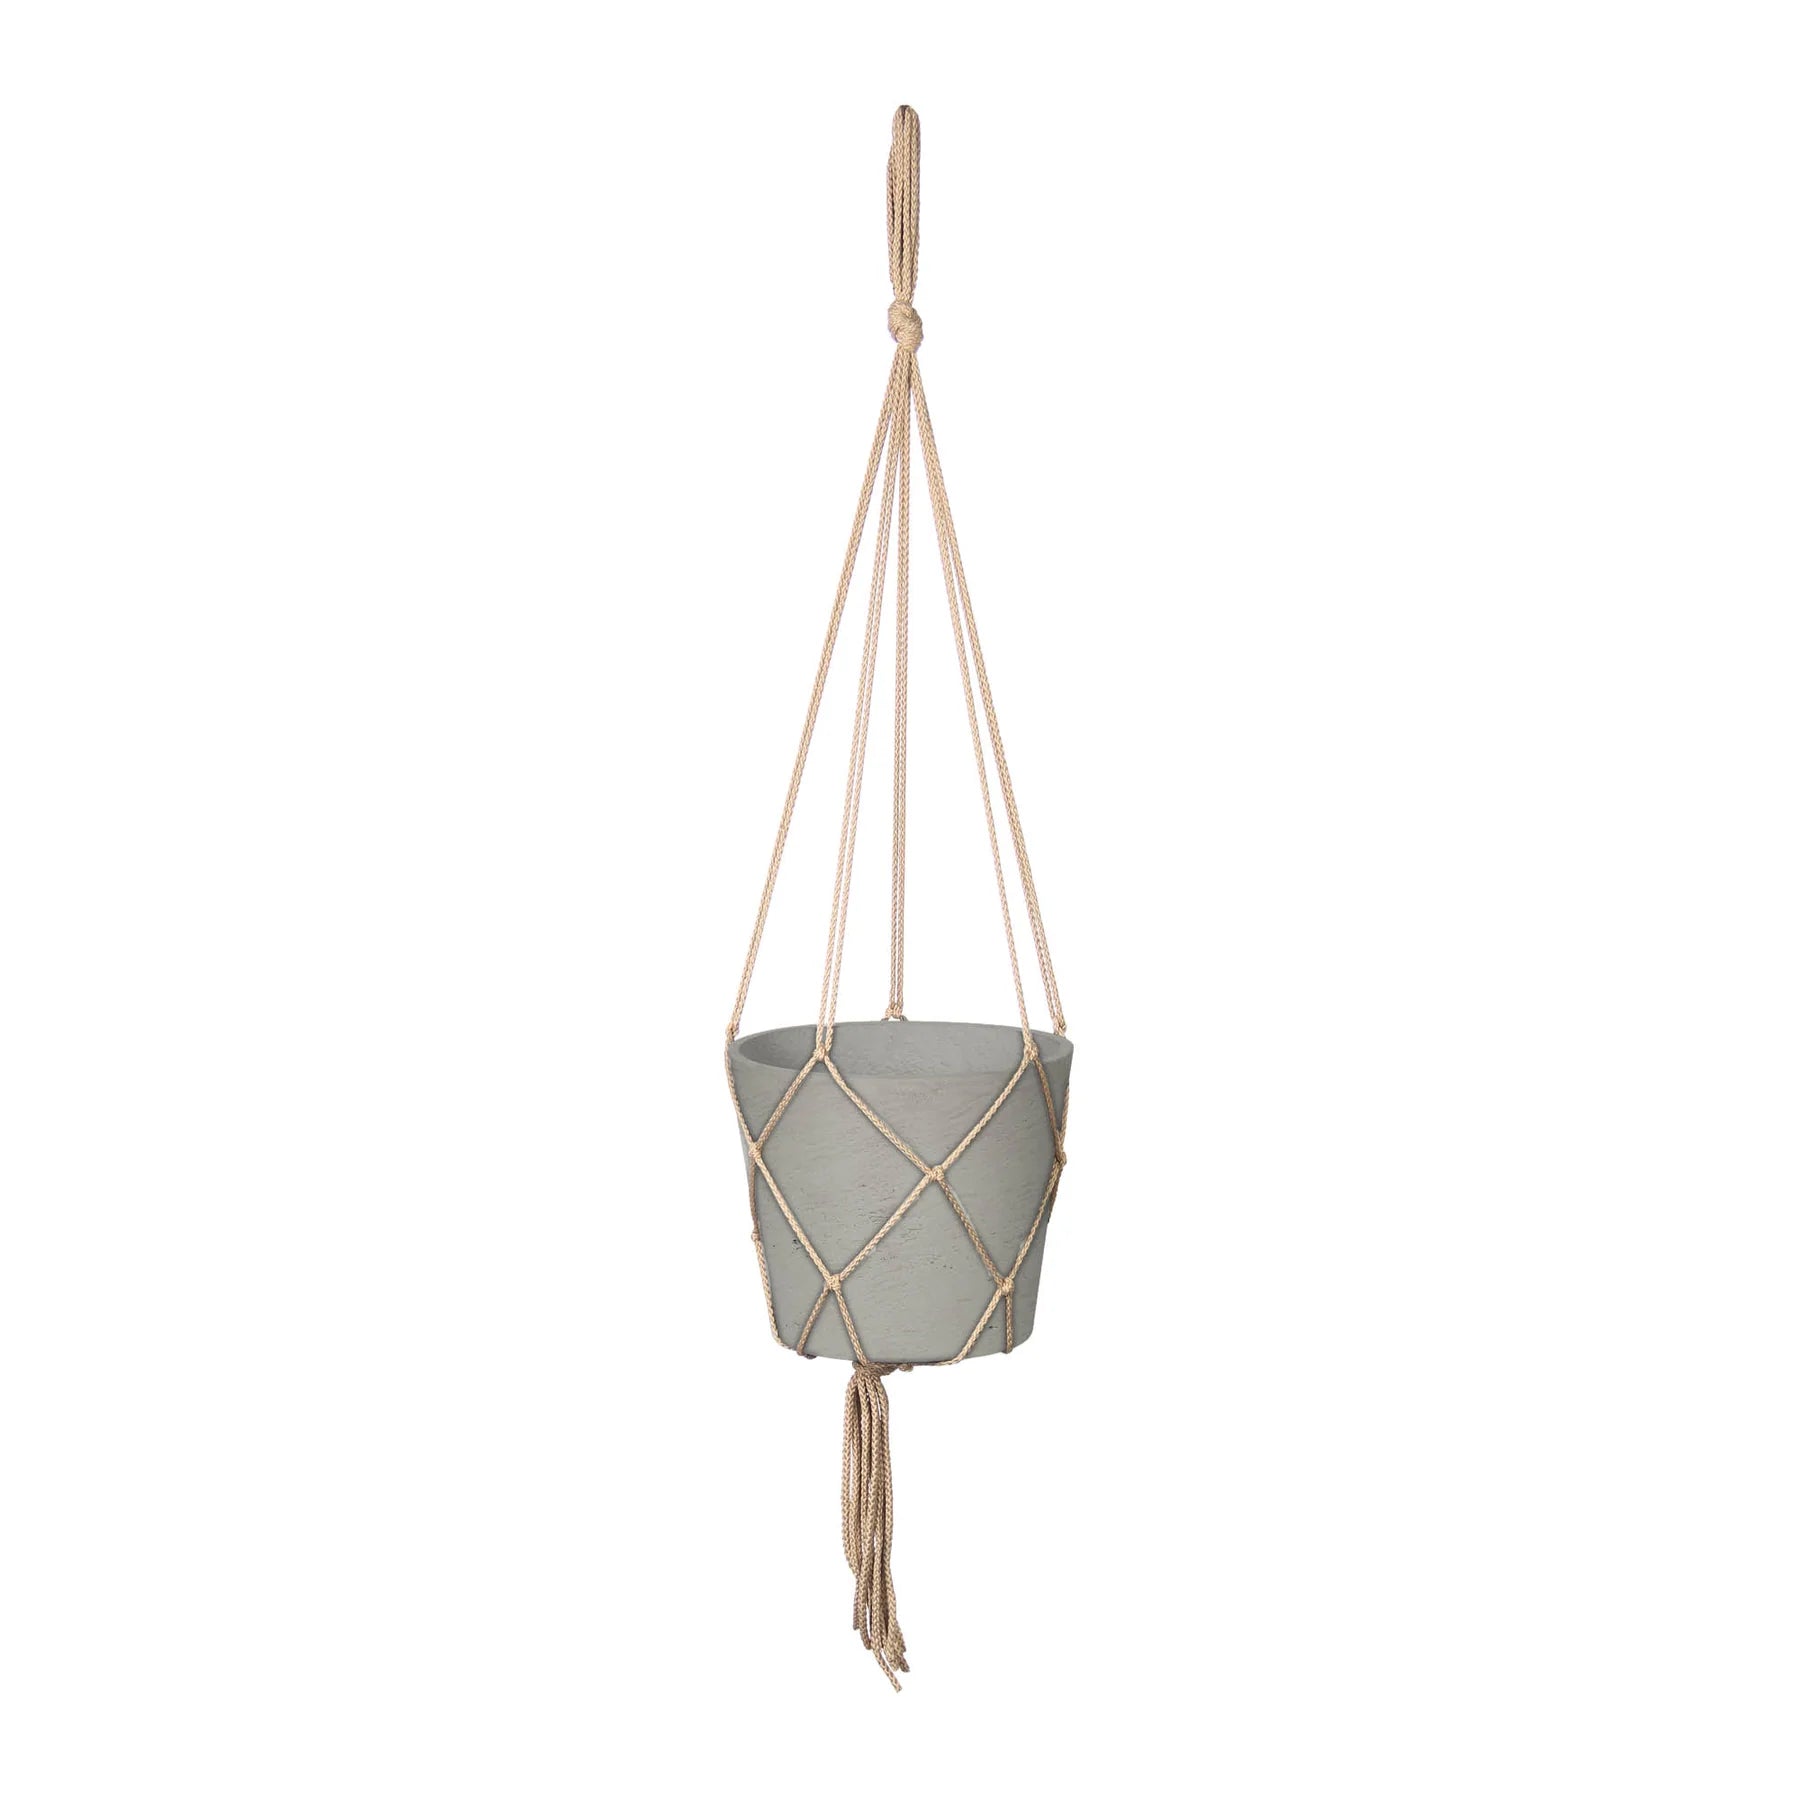 Picture of Craft Small Hanging Pot With Netting - Cement Grey